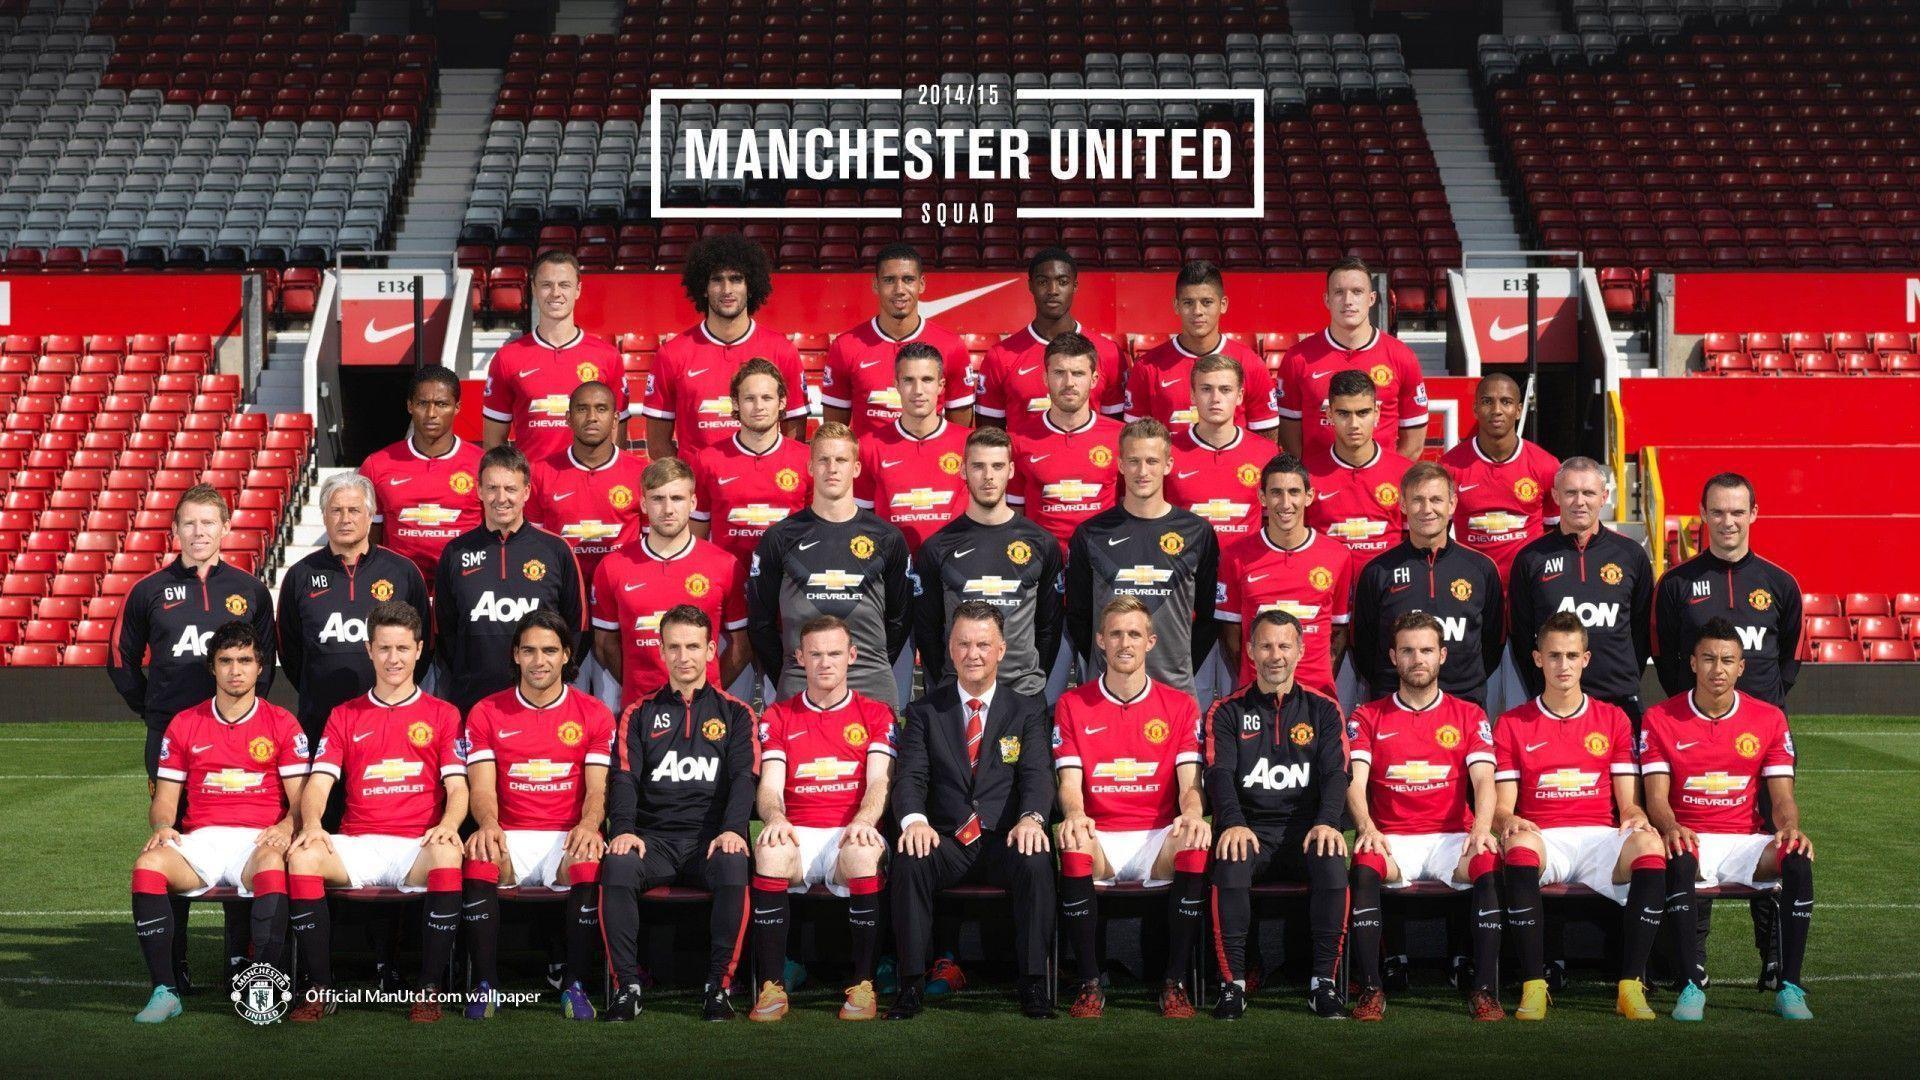 Manchester United Players1 Wallpaper: Players, Teams, Leagues